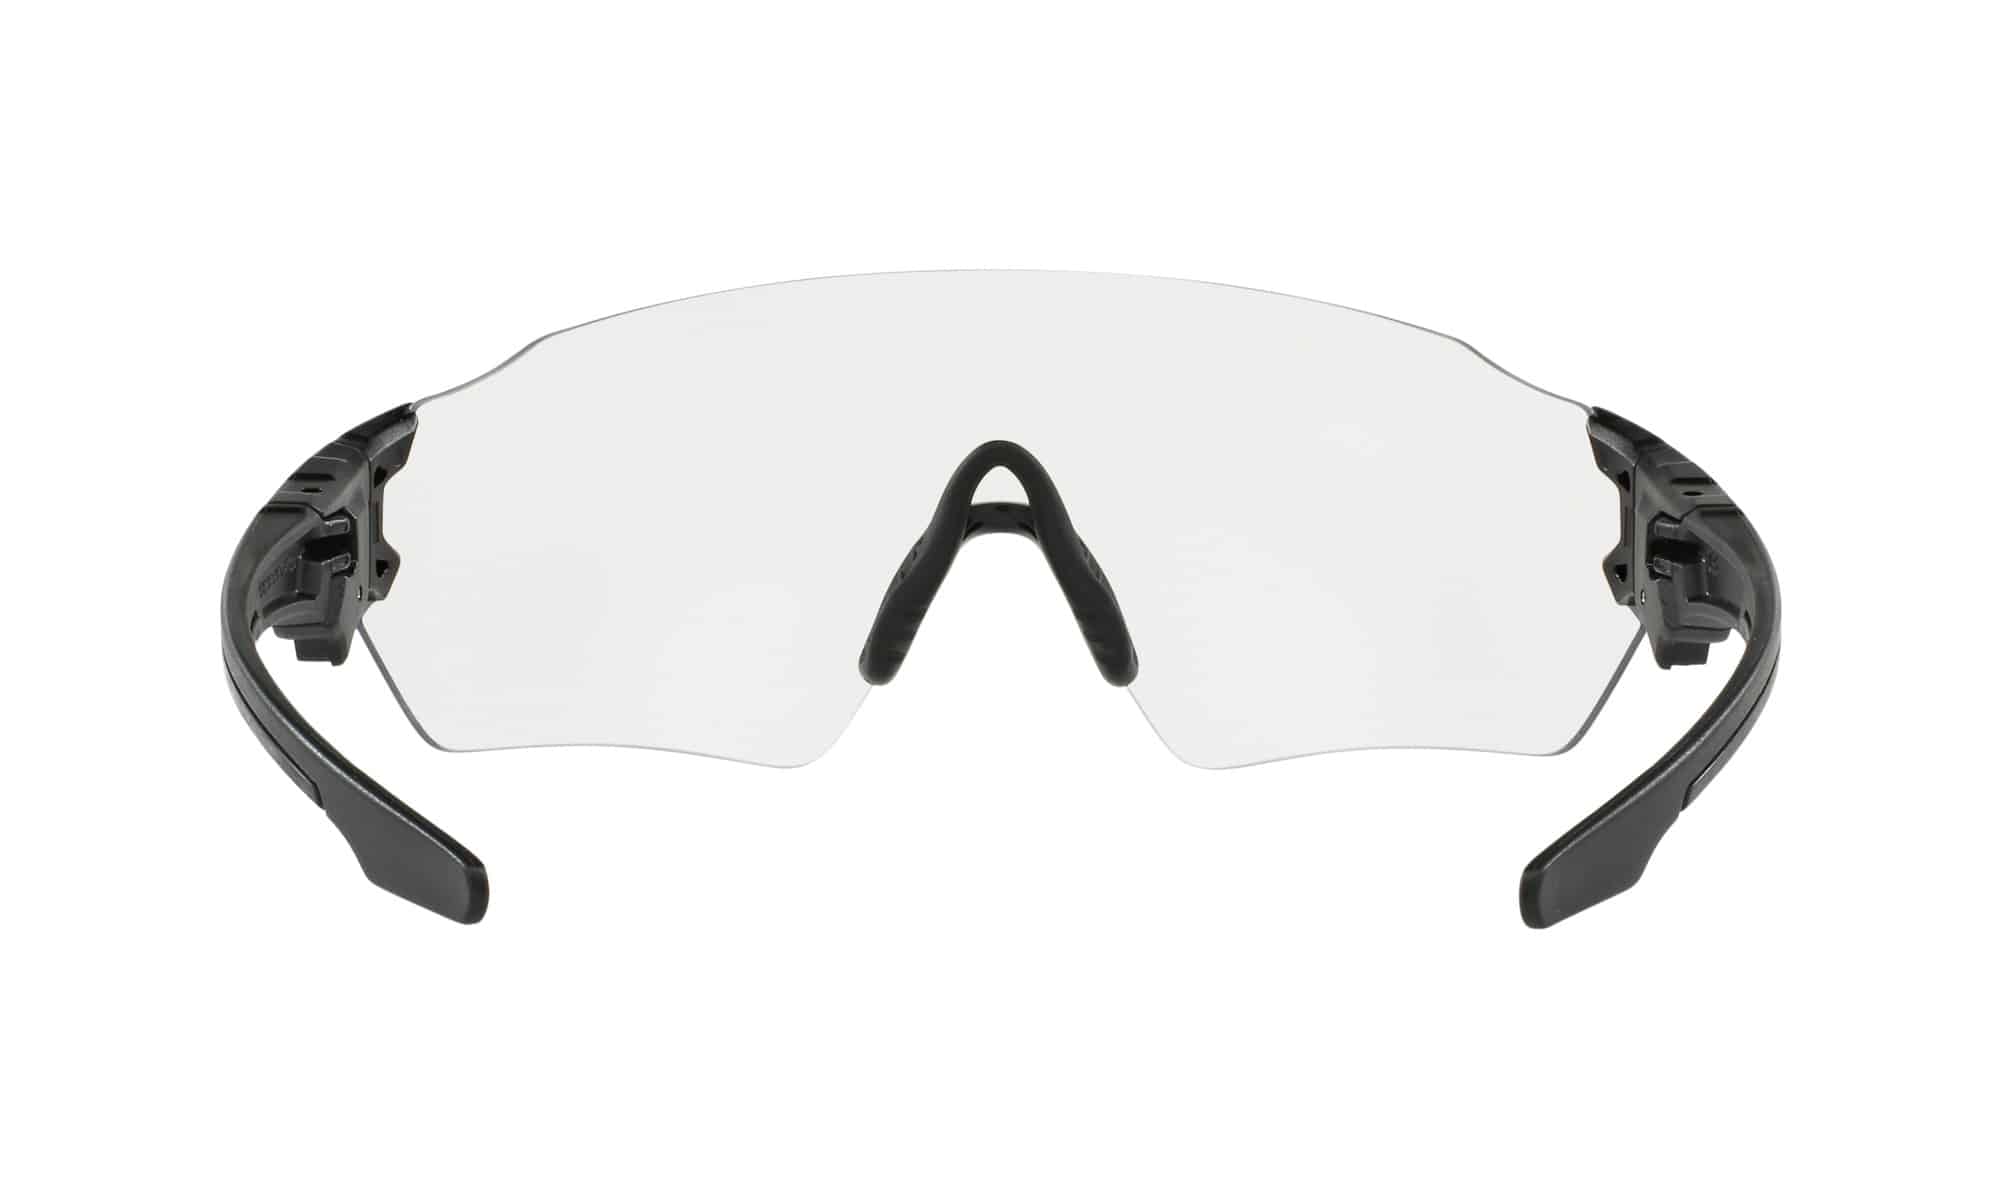 Oakley Tombstone Spoil ANSI Rated Glasses  -